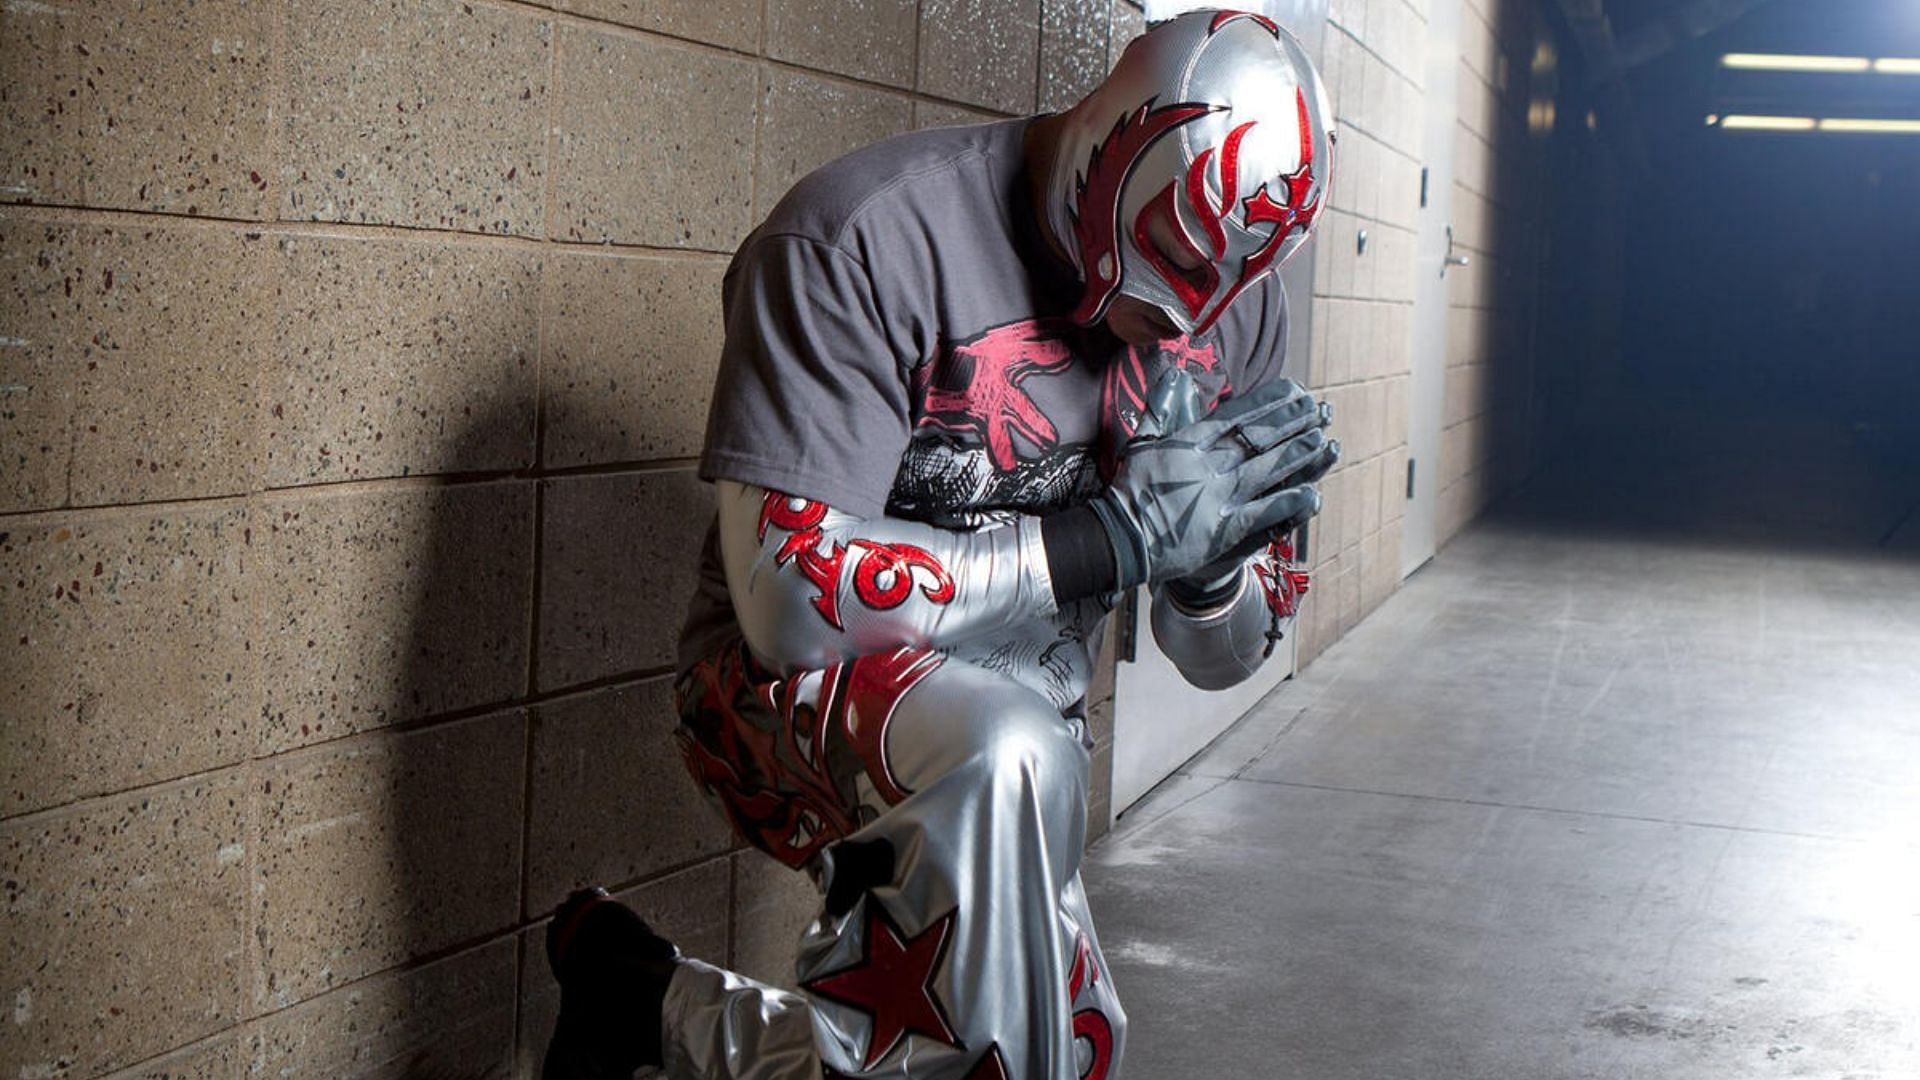 Rey Mysterio recently returned to WWE SmackDown